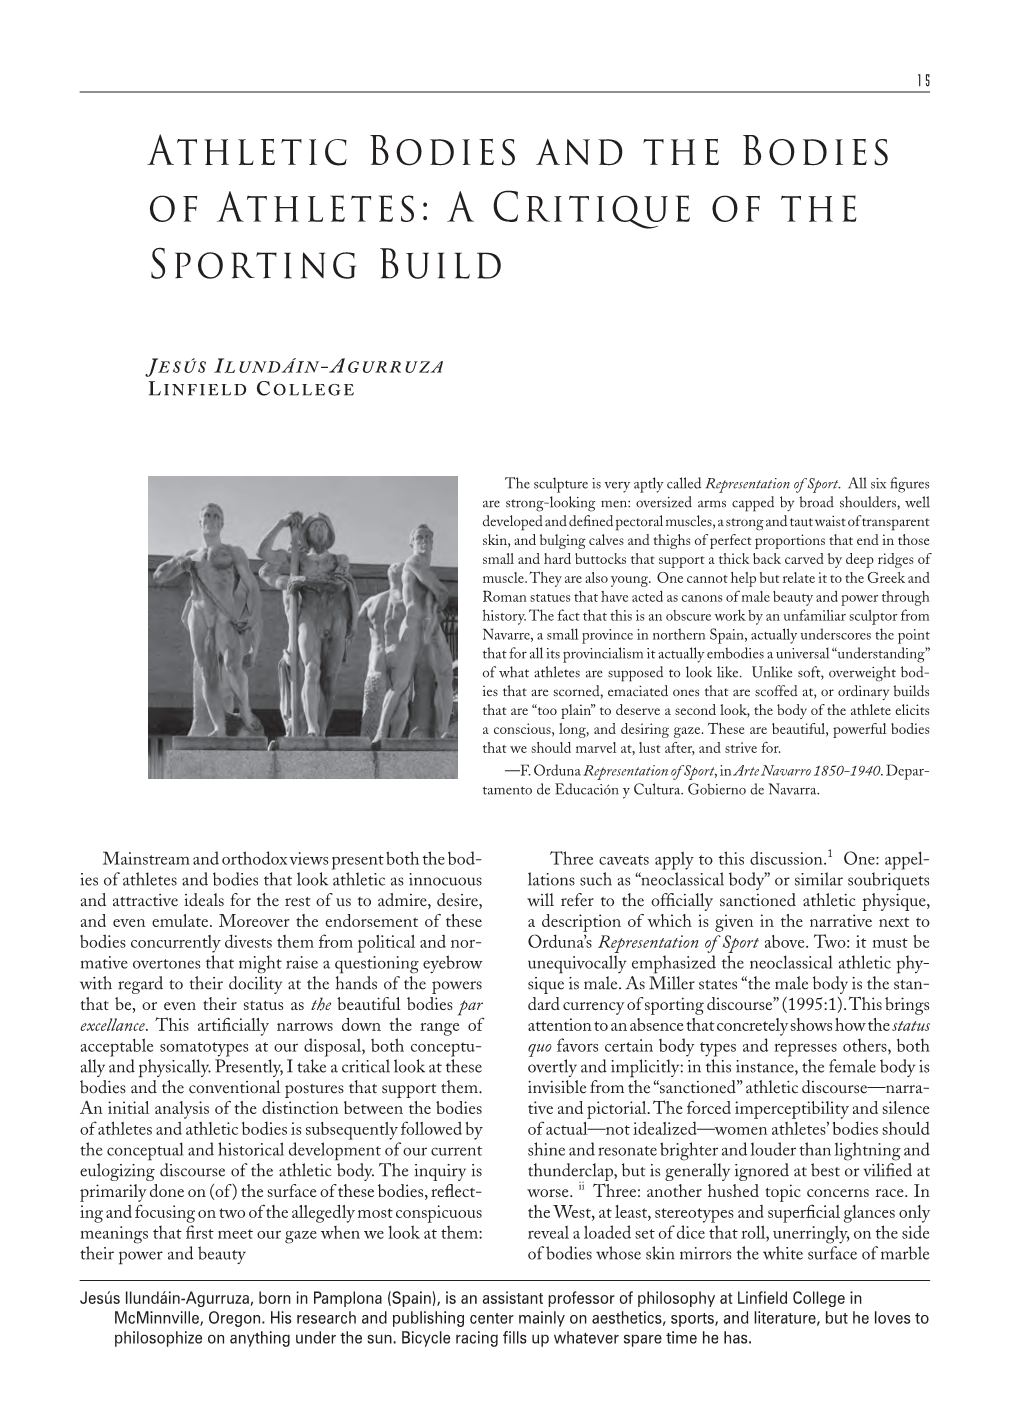 Athletic Bodies and the Bodies of Athletes: a Critique of the Sporting Build